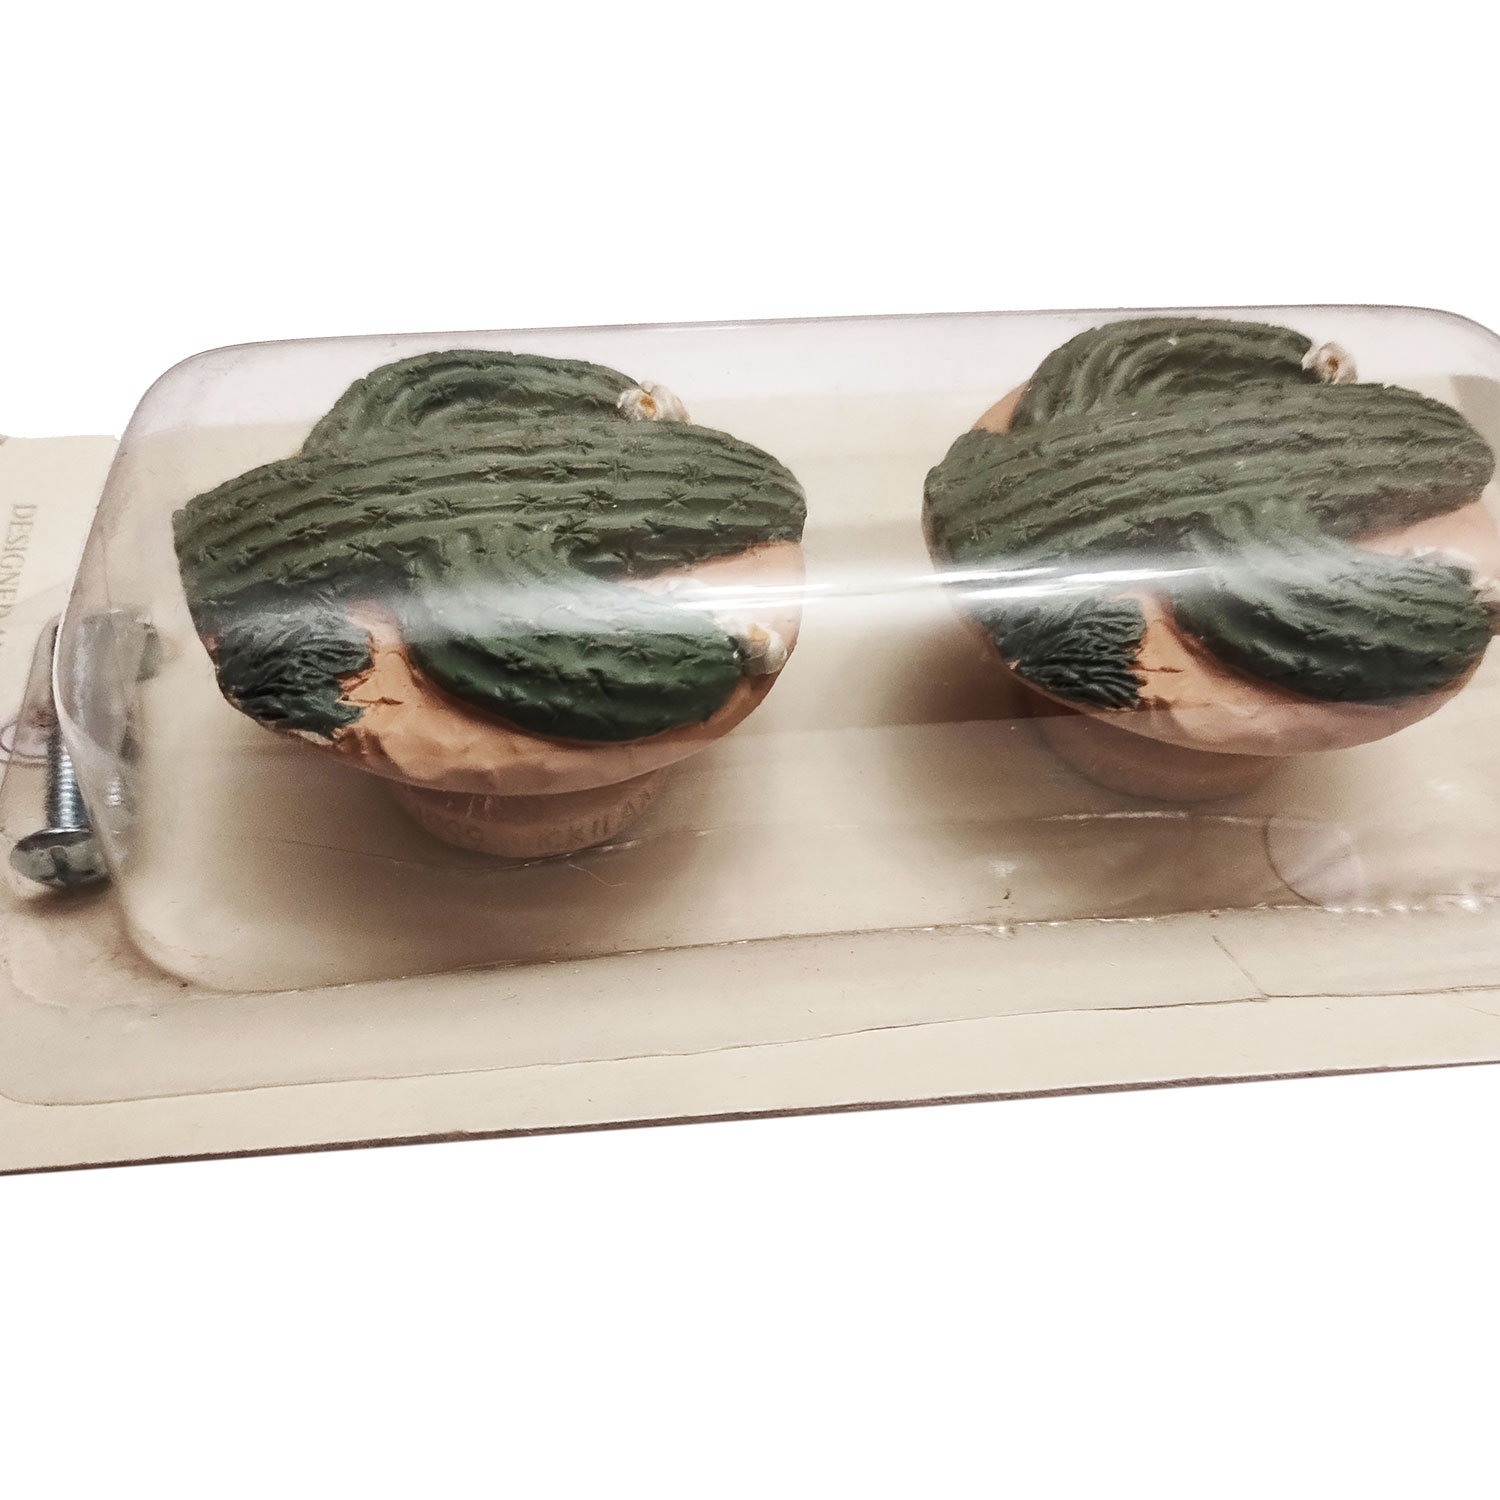 131160 - Vickilane Hand Painted Drawer Pull Set of 2 - Cactus